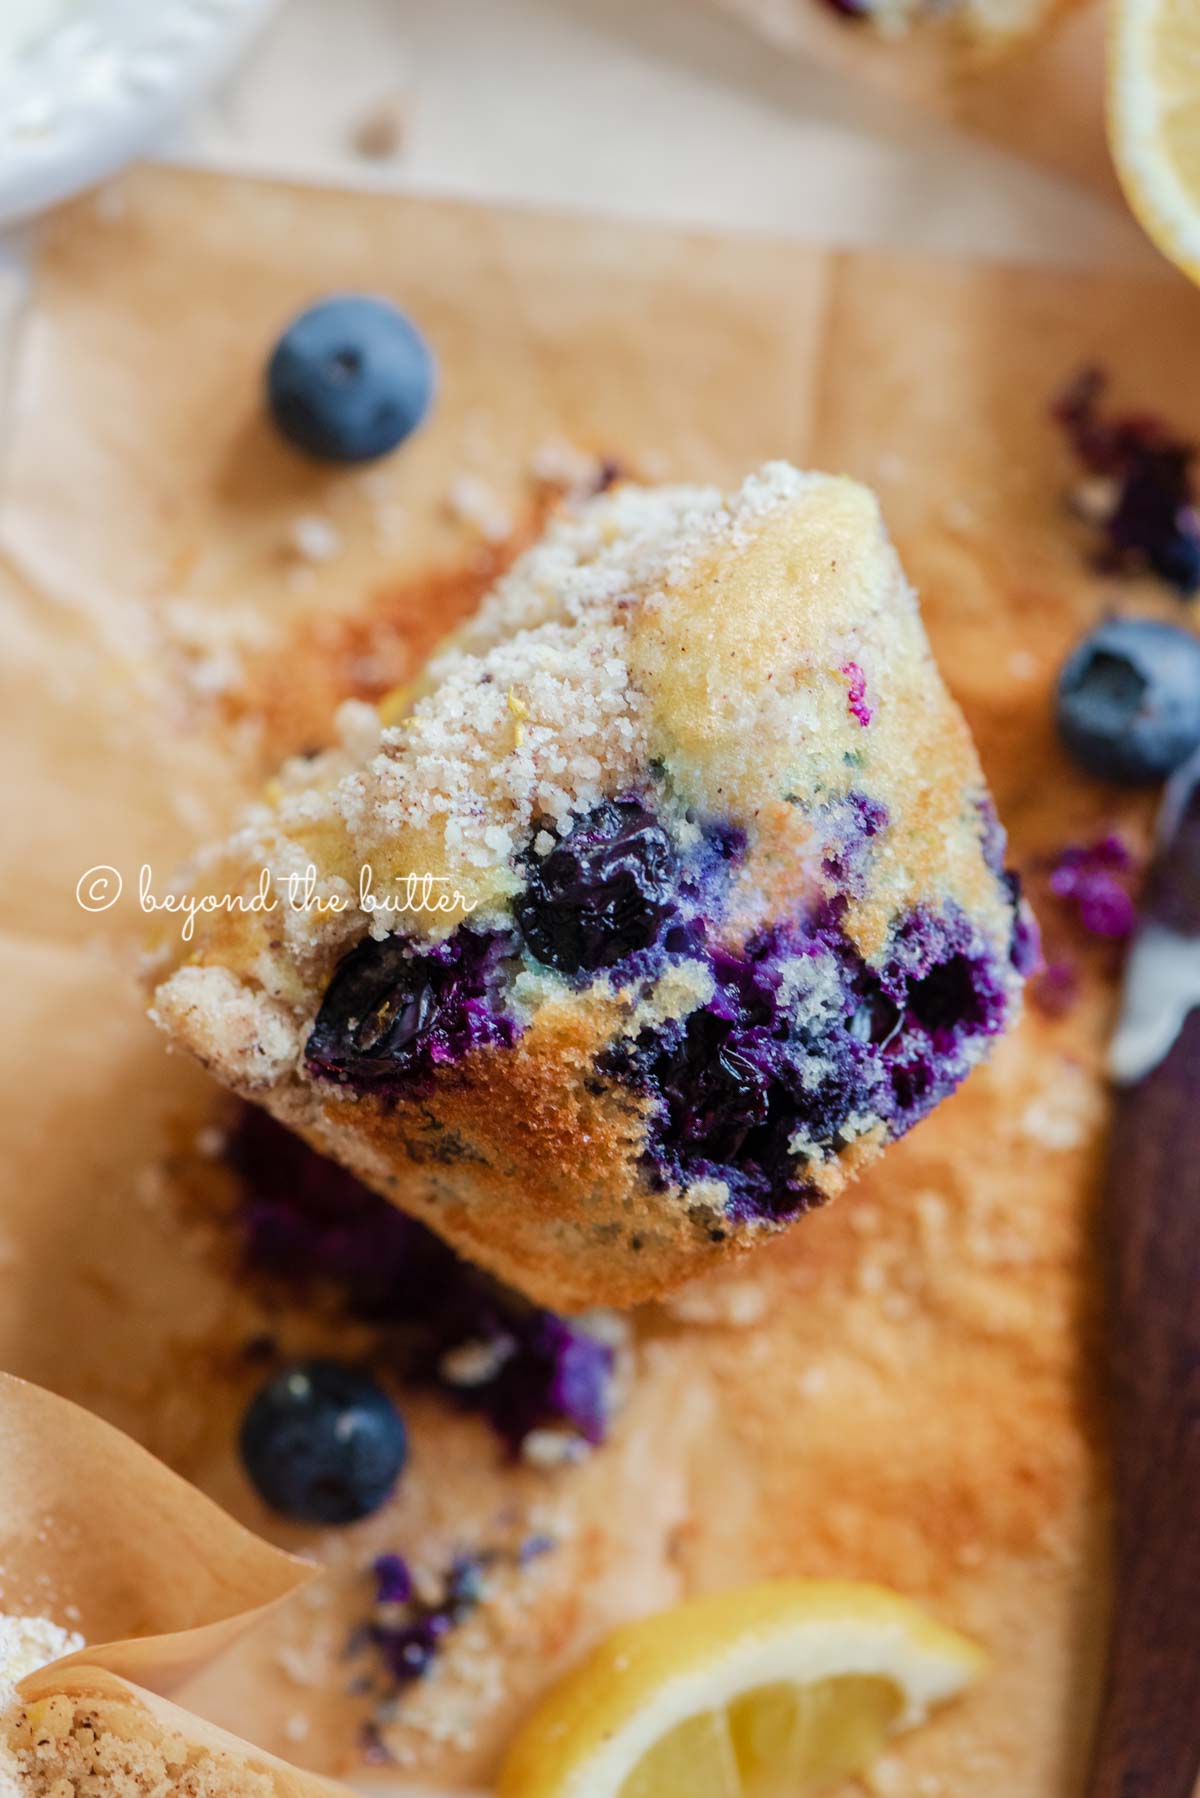 Unwrapped lemon blueberry streusel muffin with lemon wedges and blueberries around it | All images © Beyond the Butter®